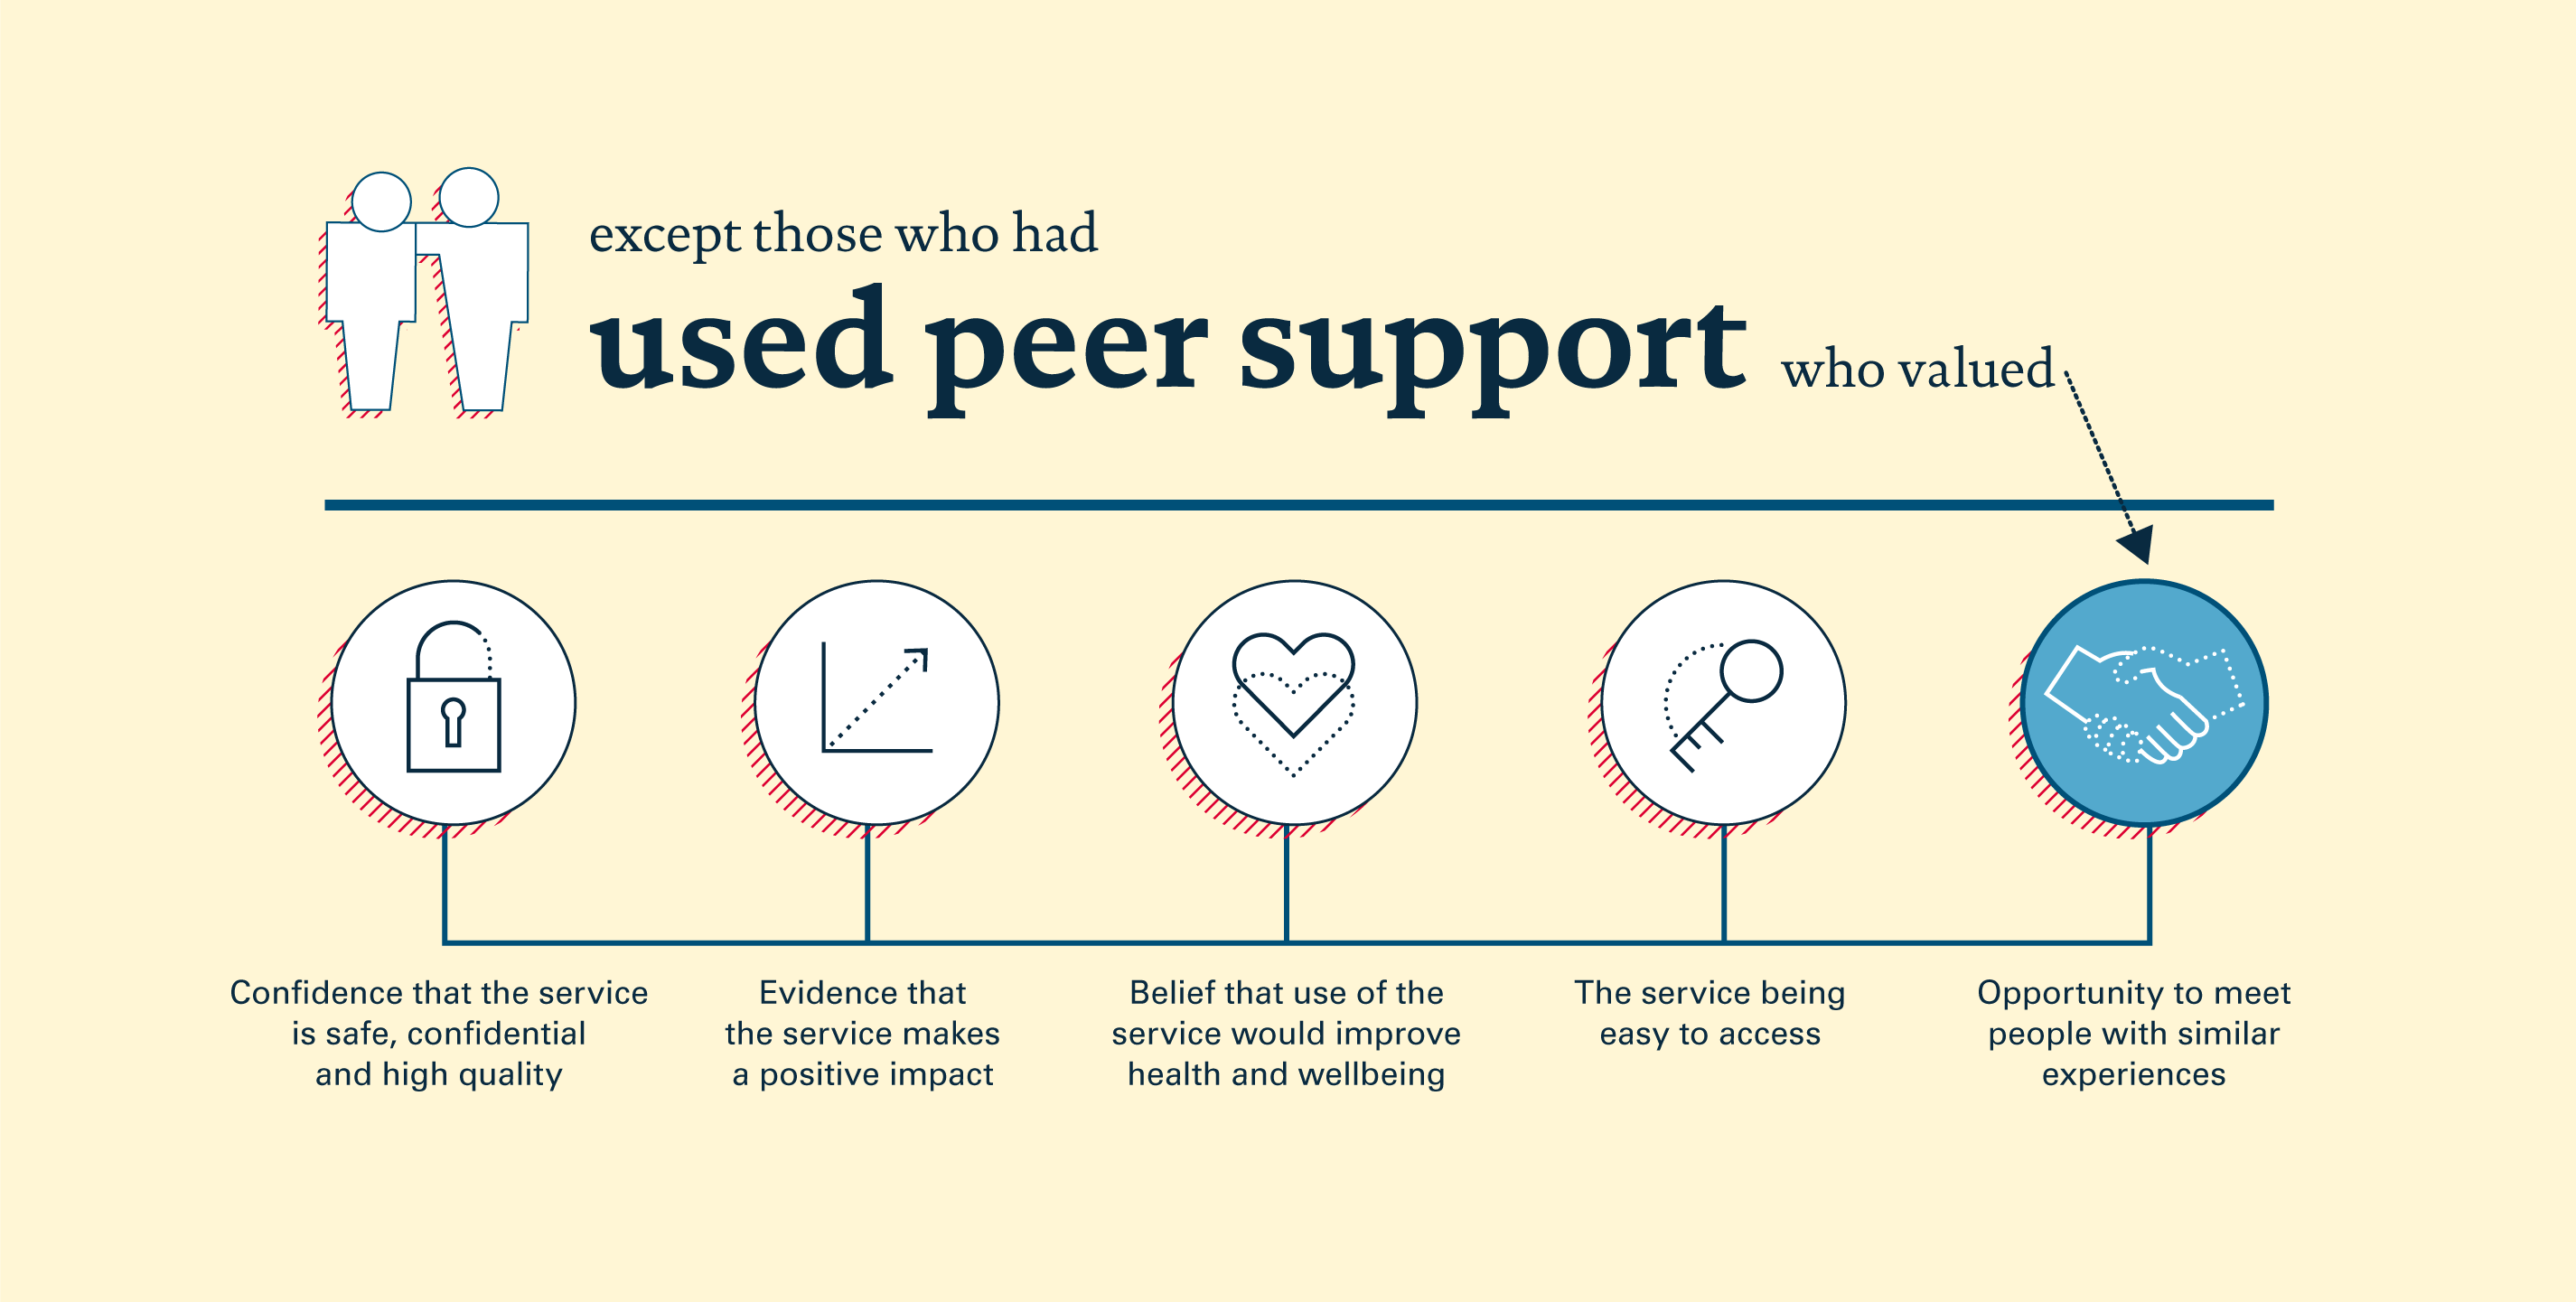 Infographic from peer support survey showing what those who had used peer support valued